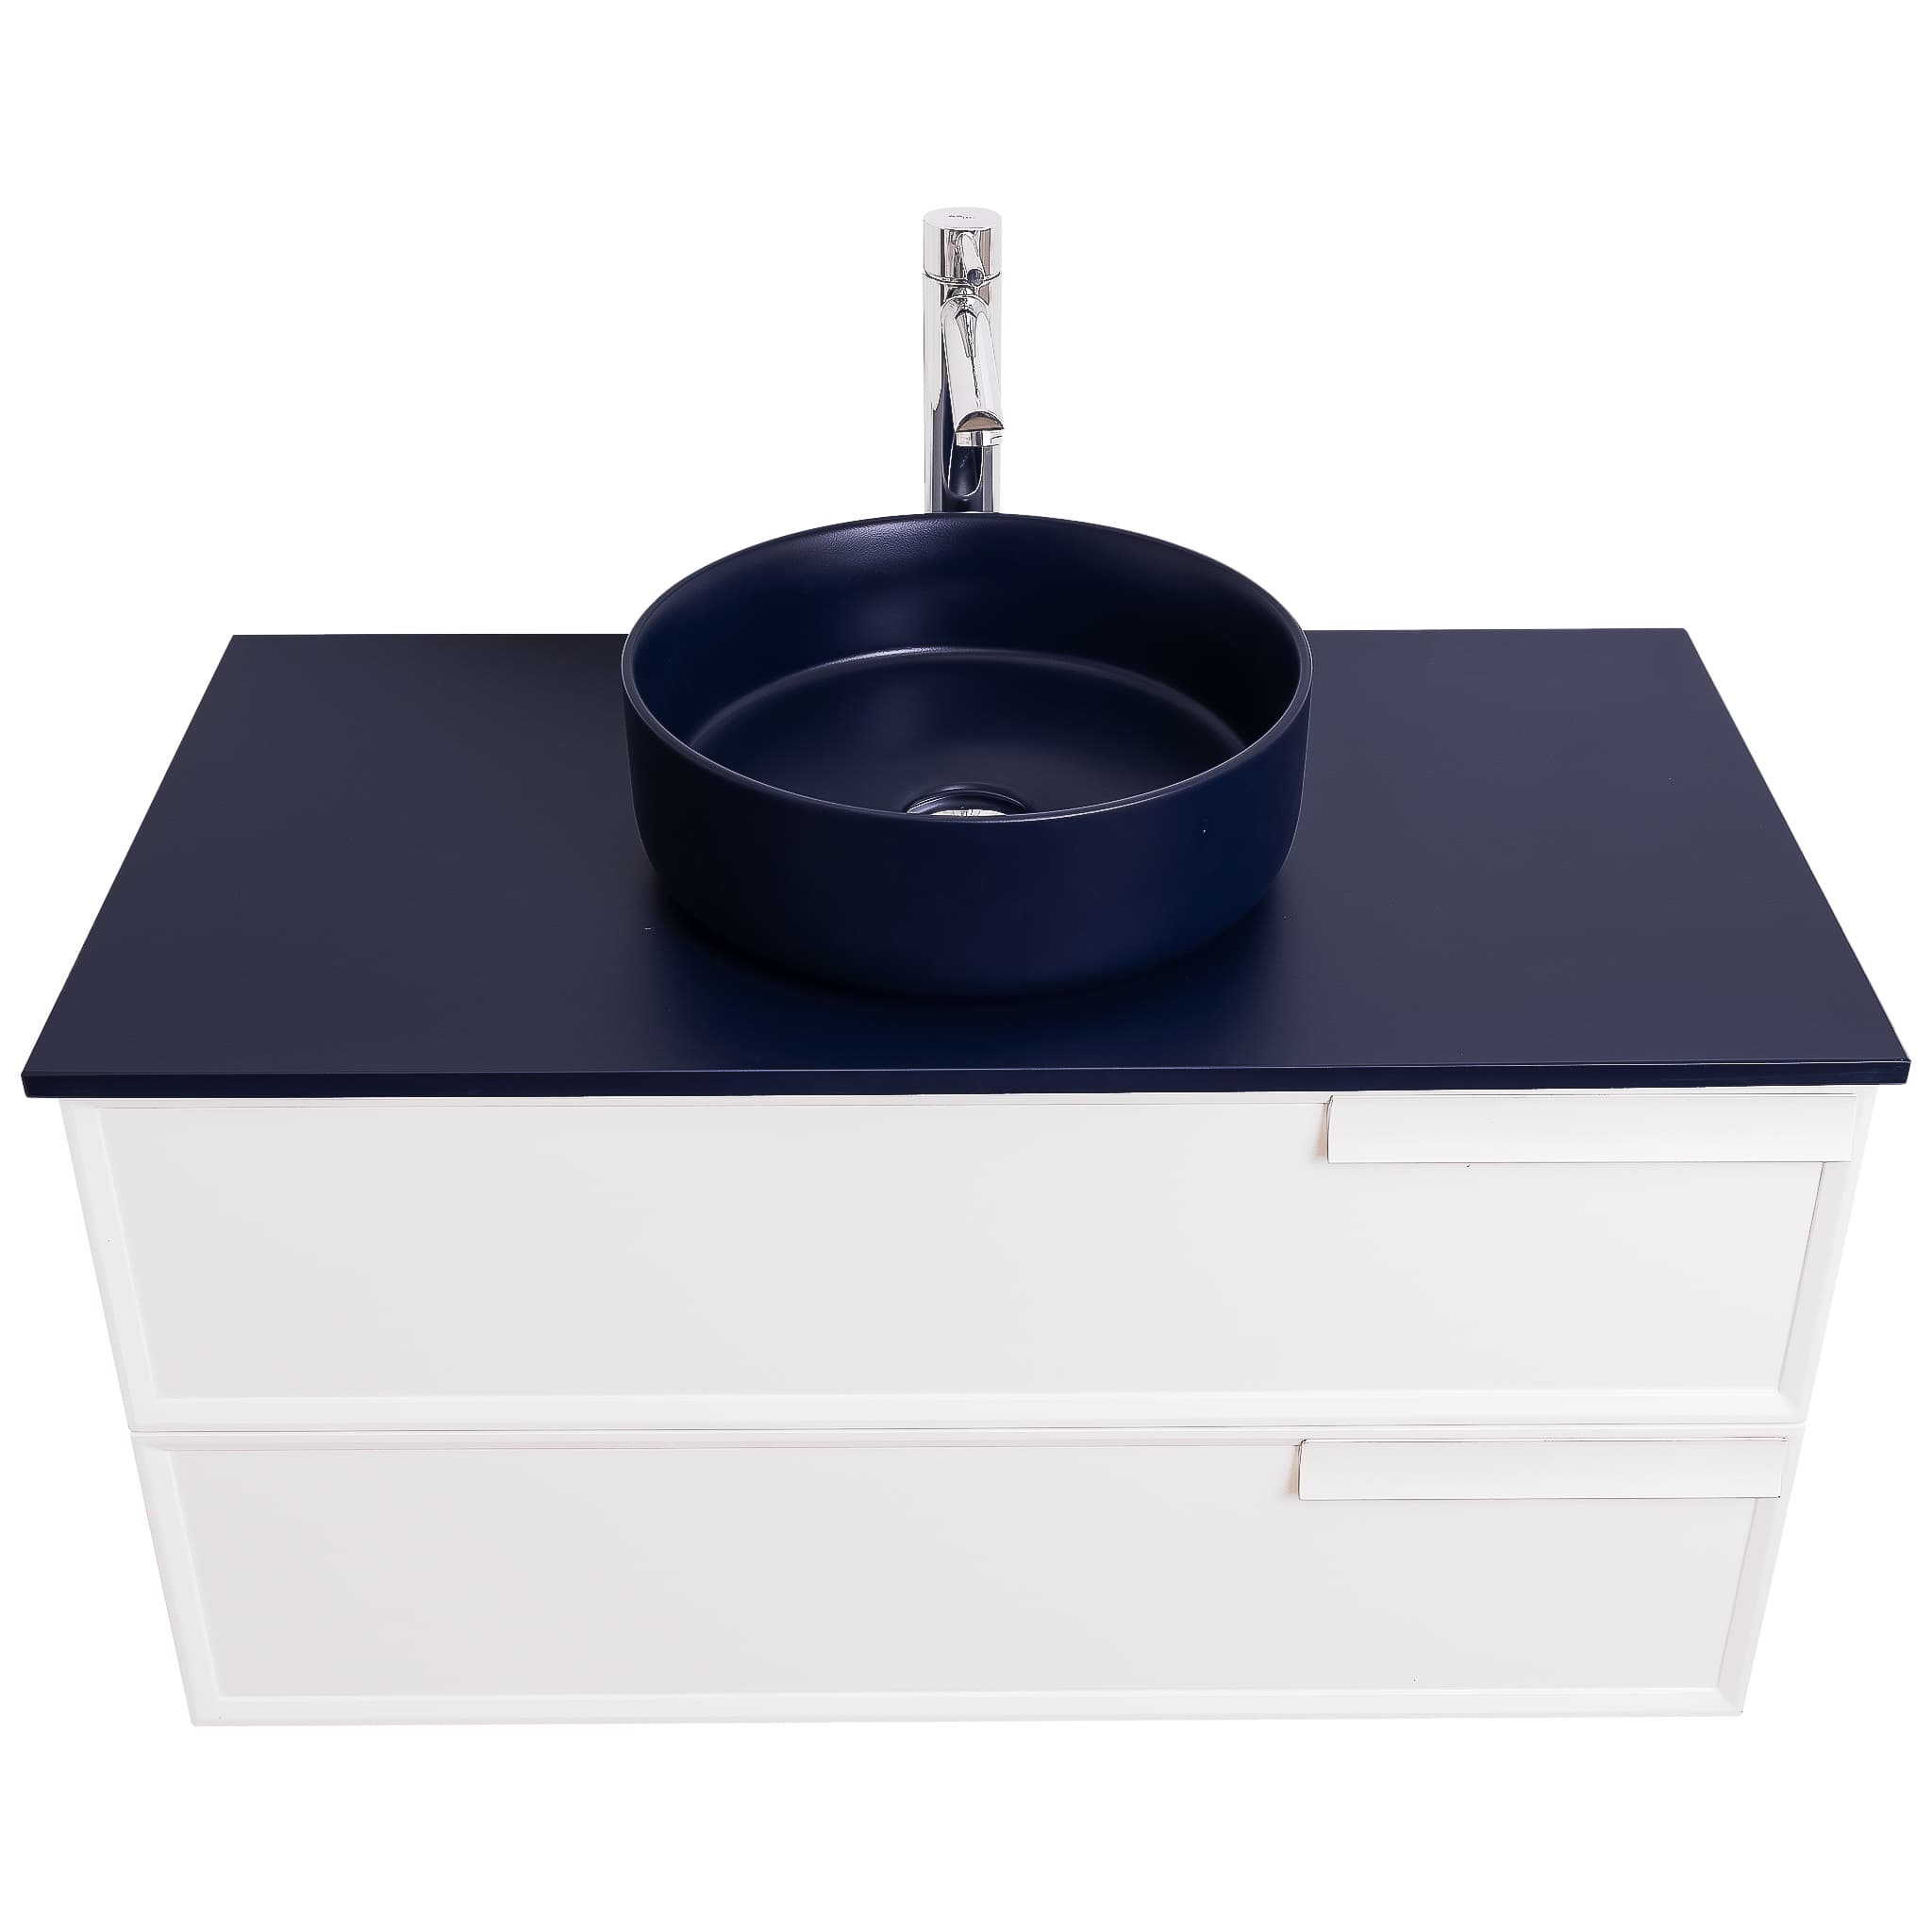 Garda 39.5 Matte White Cabinet, Ares Navy Blue Top and Ares Navy Blue Ceramic Basin, Wall Mounted Modern Vanity Set